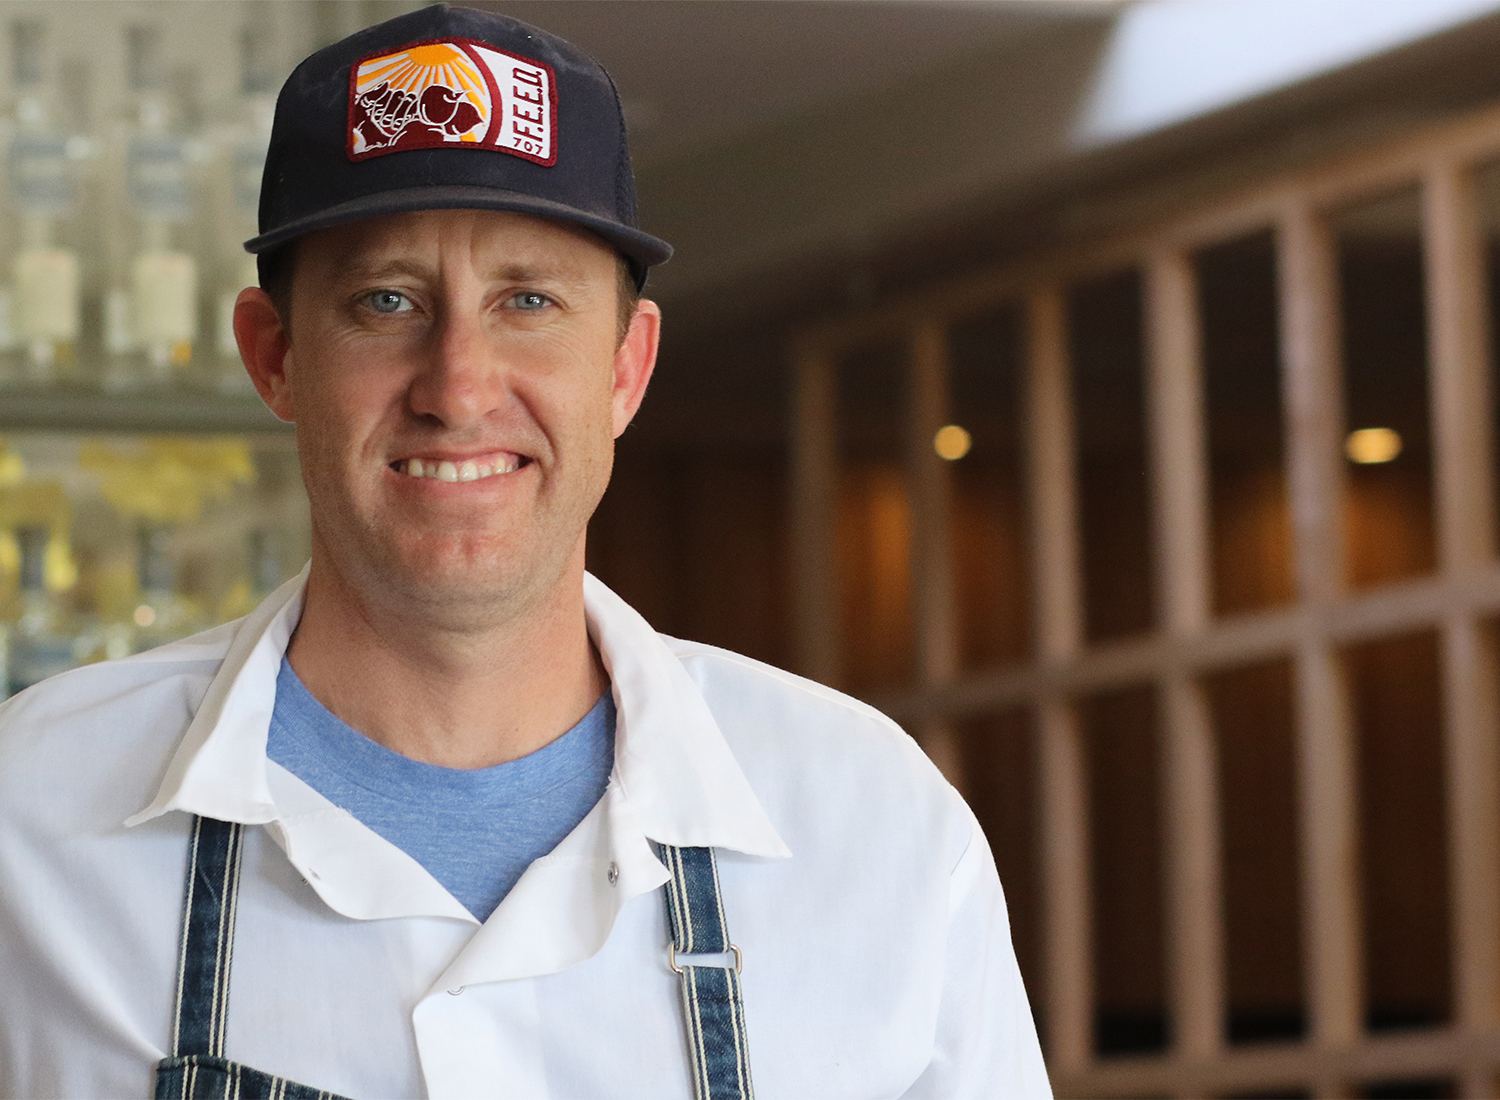 Chef Mike Mullins at Perch and Plow restaurant in Santa Rosa.